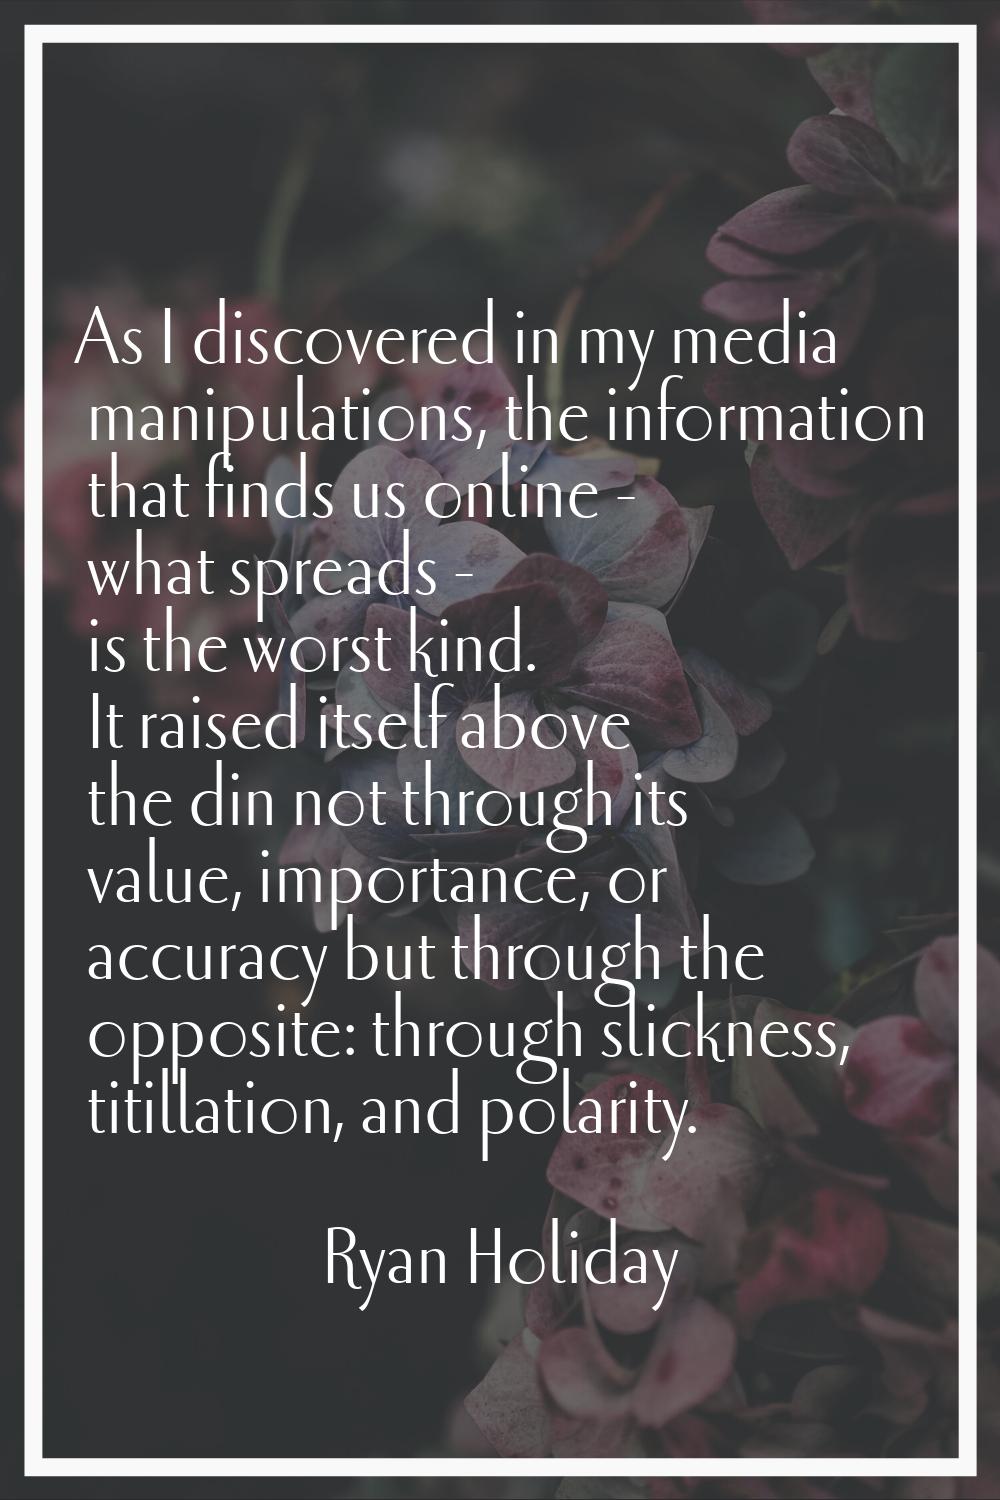 As I discovered in my media manipulations, the information that finds us online - what spreads - is